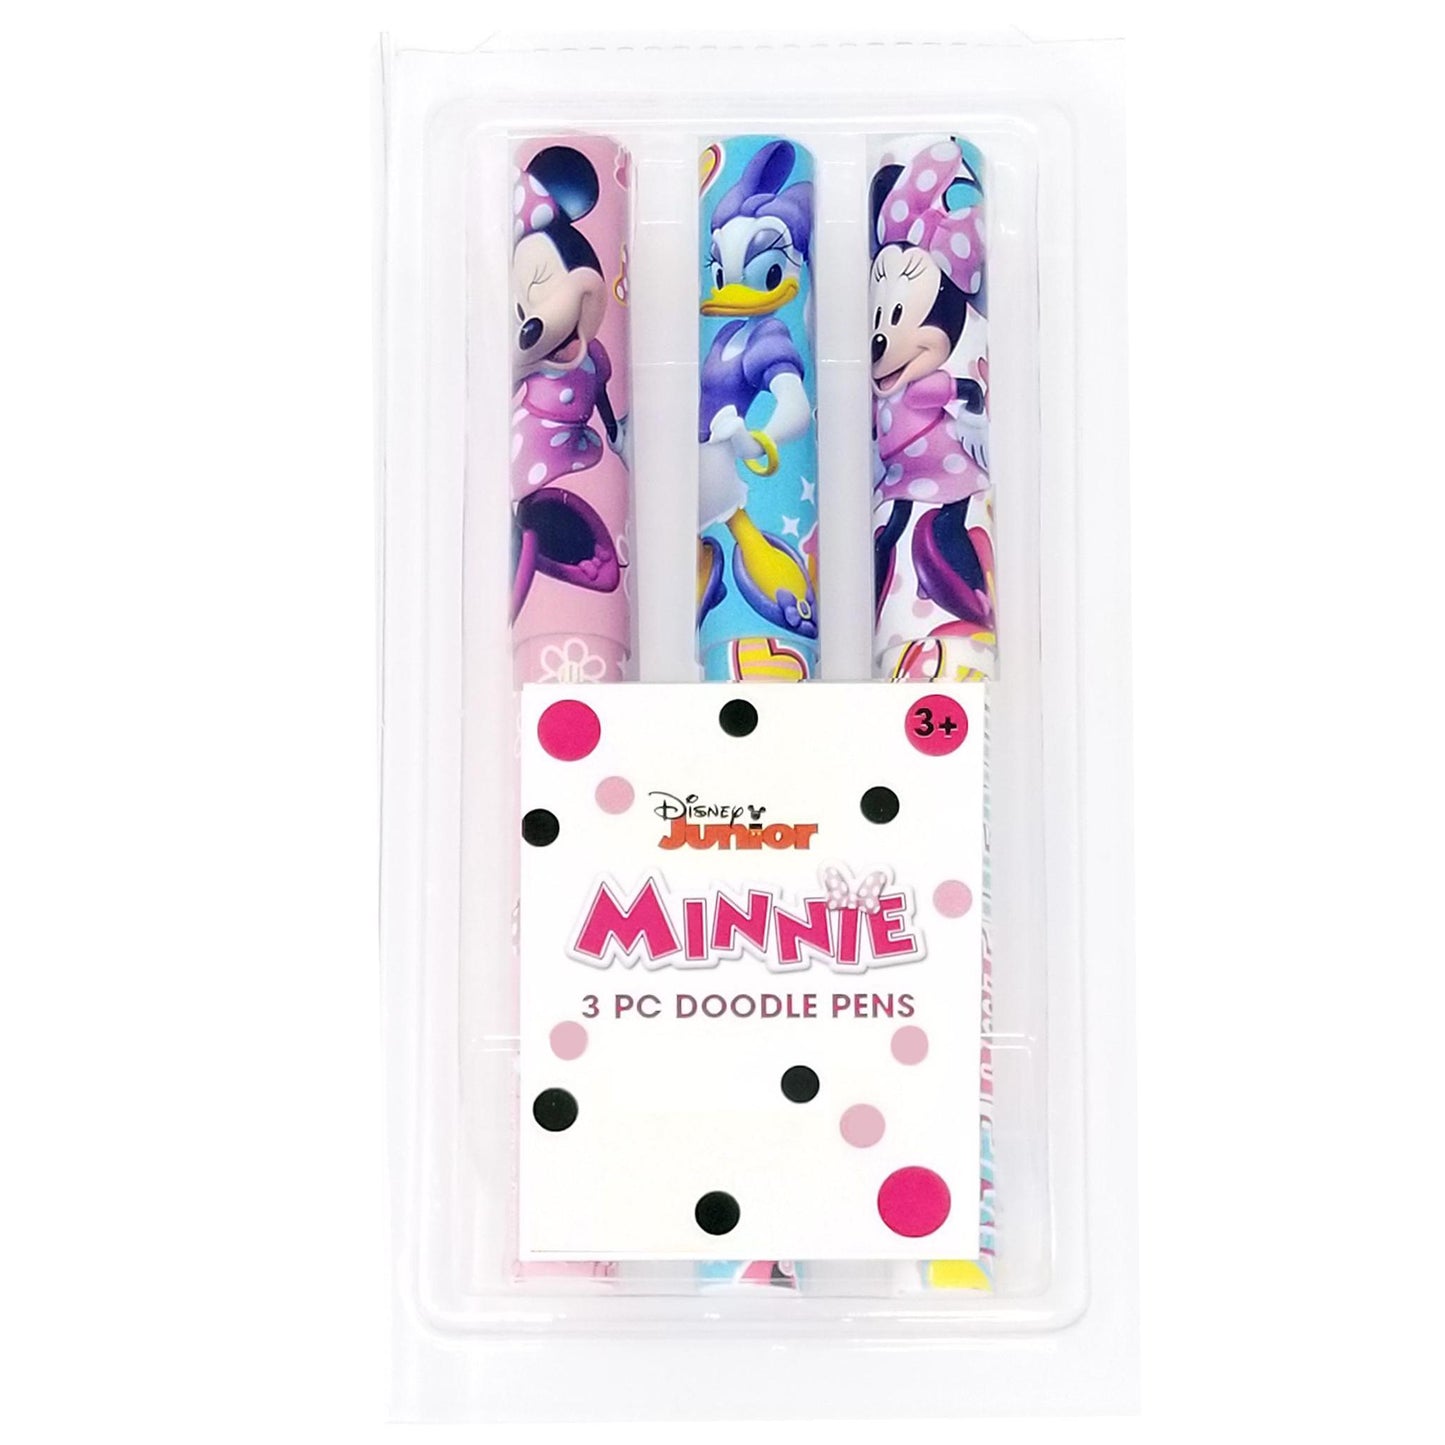 Disney Minnie Mouse and Daisy Duck Ballpoint Pen - Black Ink, 3 Pack